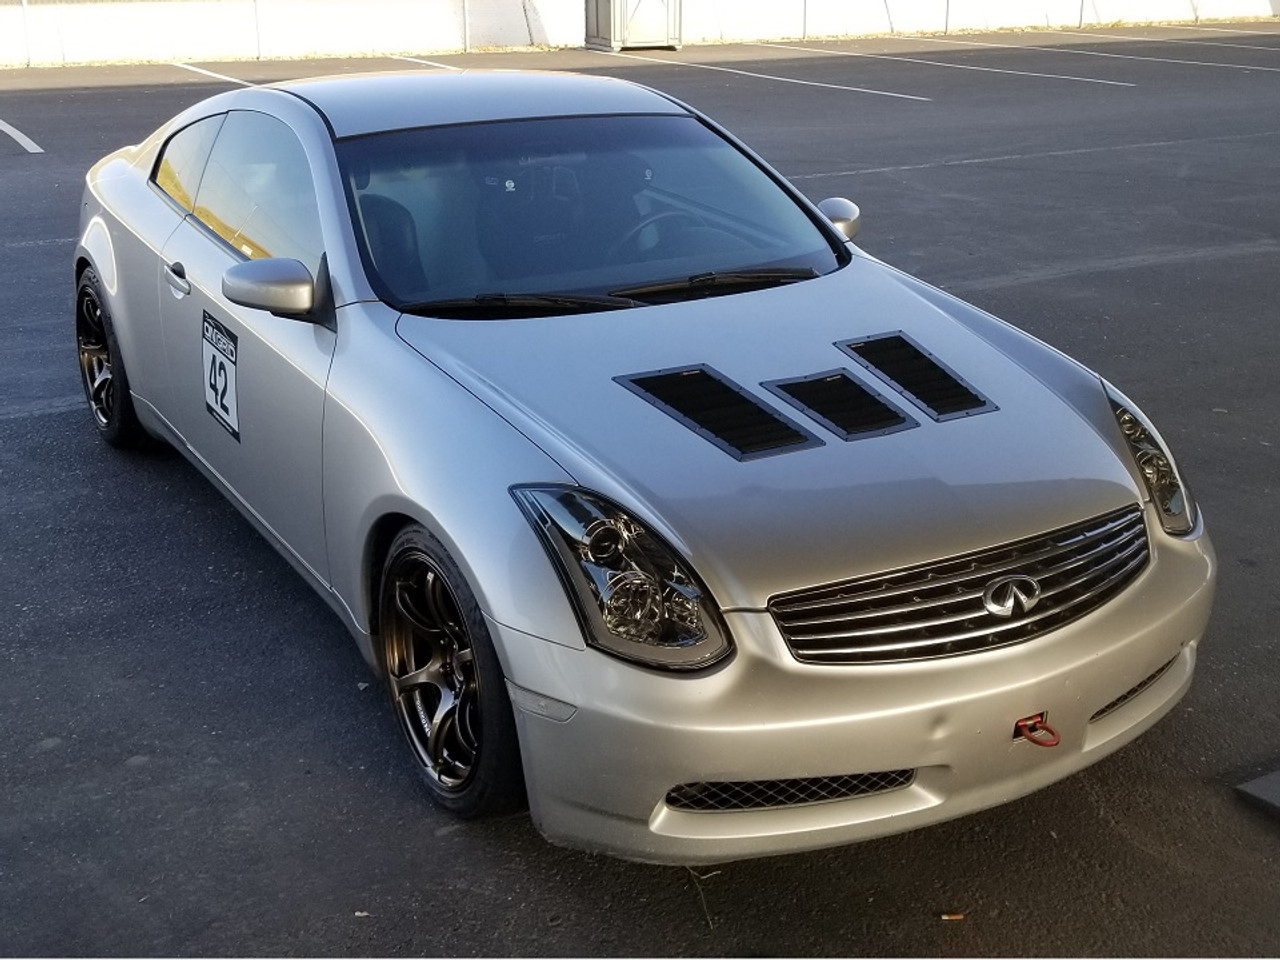 Race Louver RT trim center car hood vent designed for street, high performance driving and light track duty.